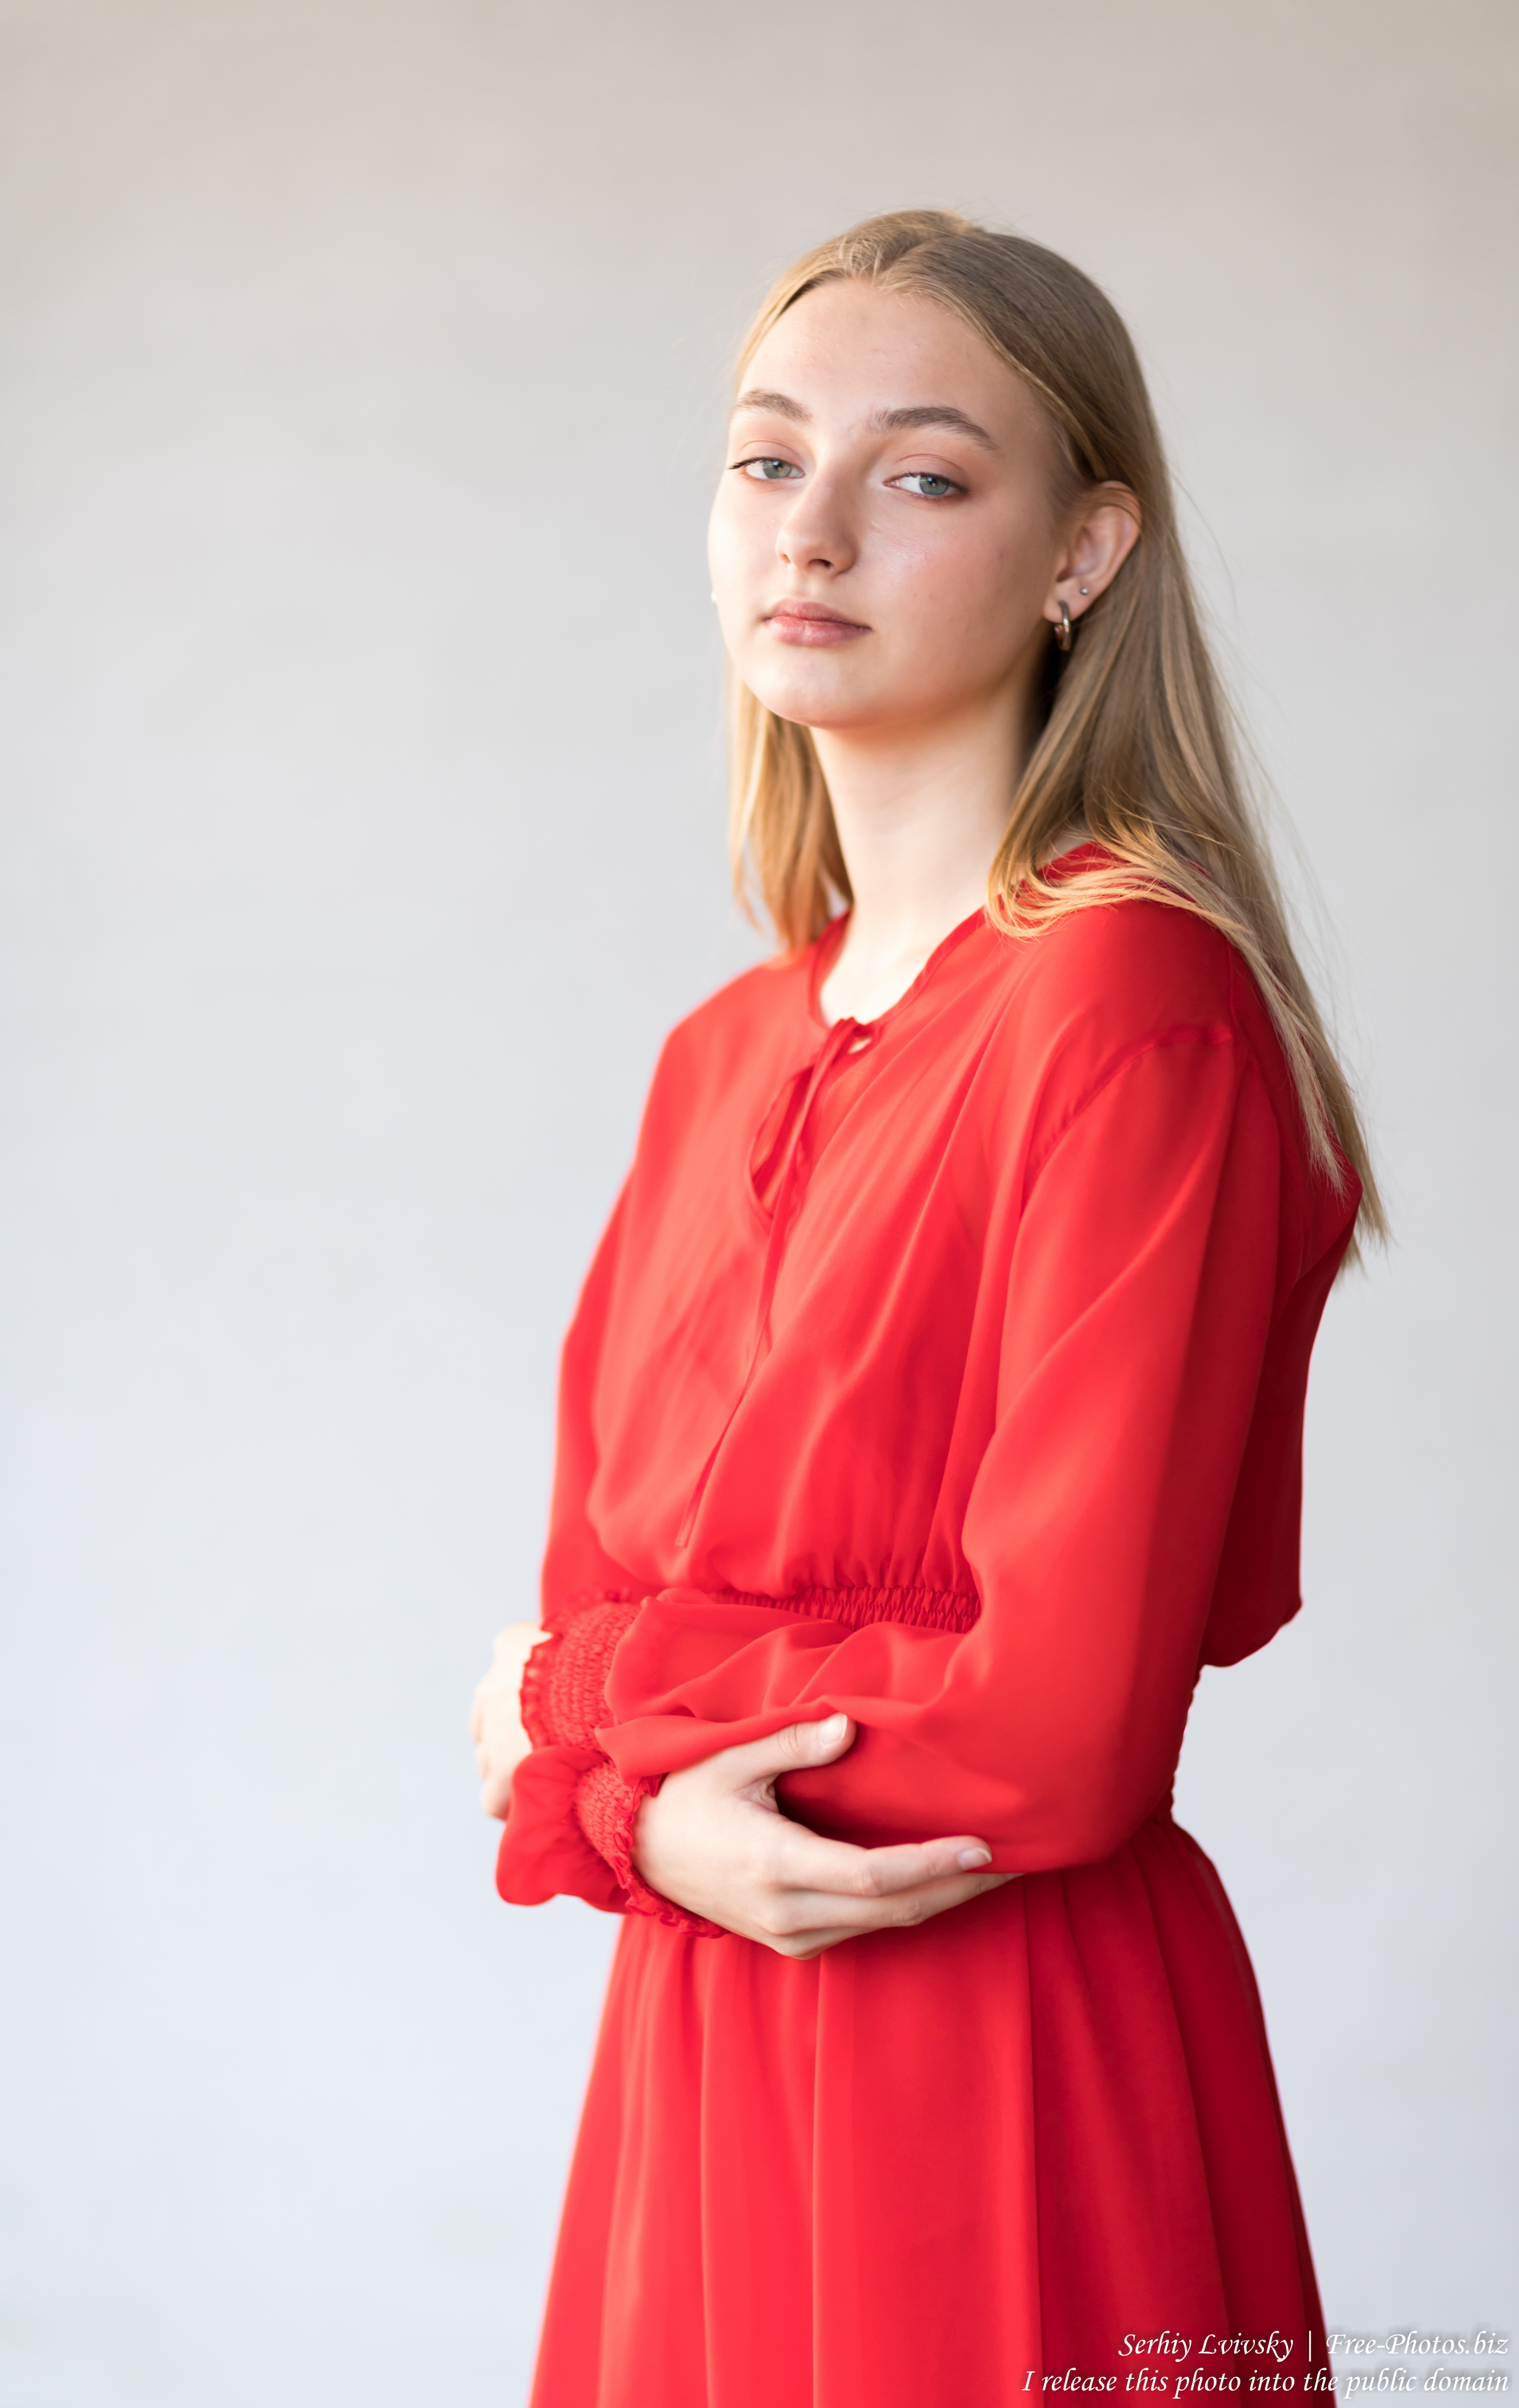 nastia_a_16-year-old_natural_blonde_girl_photographed_in_september_2019_by_serhiy_lvivsky_06